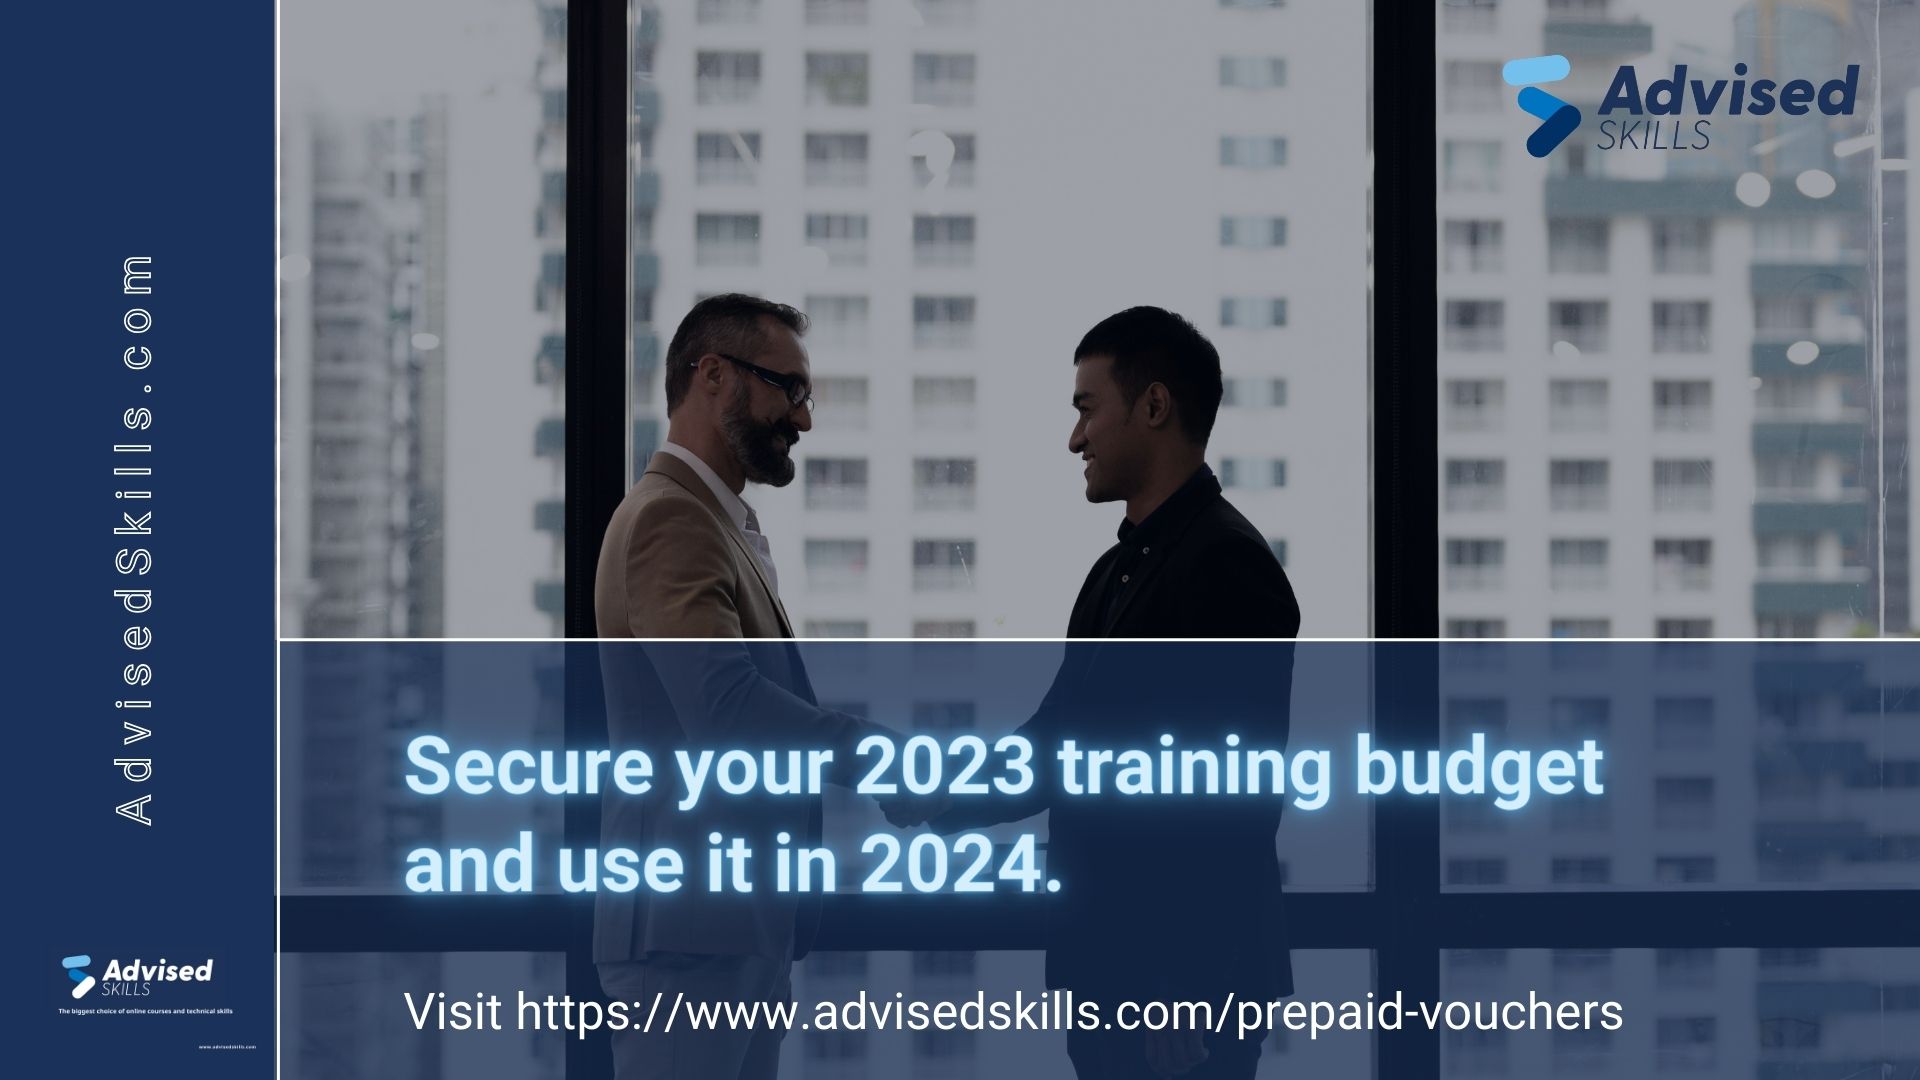 Secure your 2023 training budget and use it in 2024.